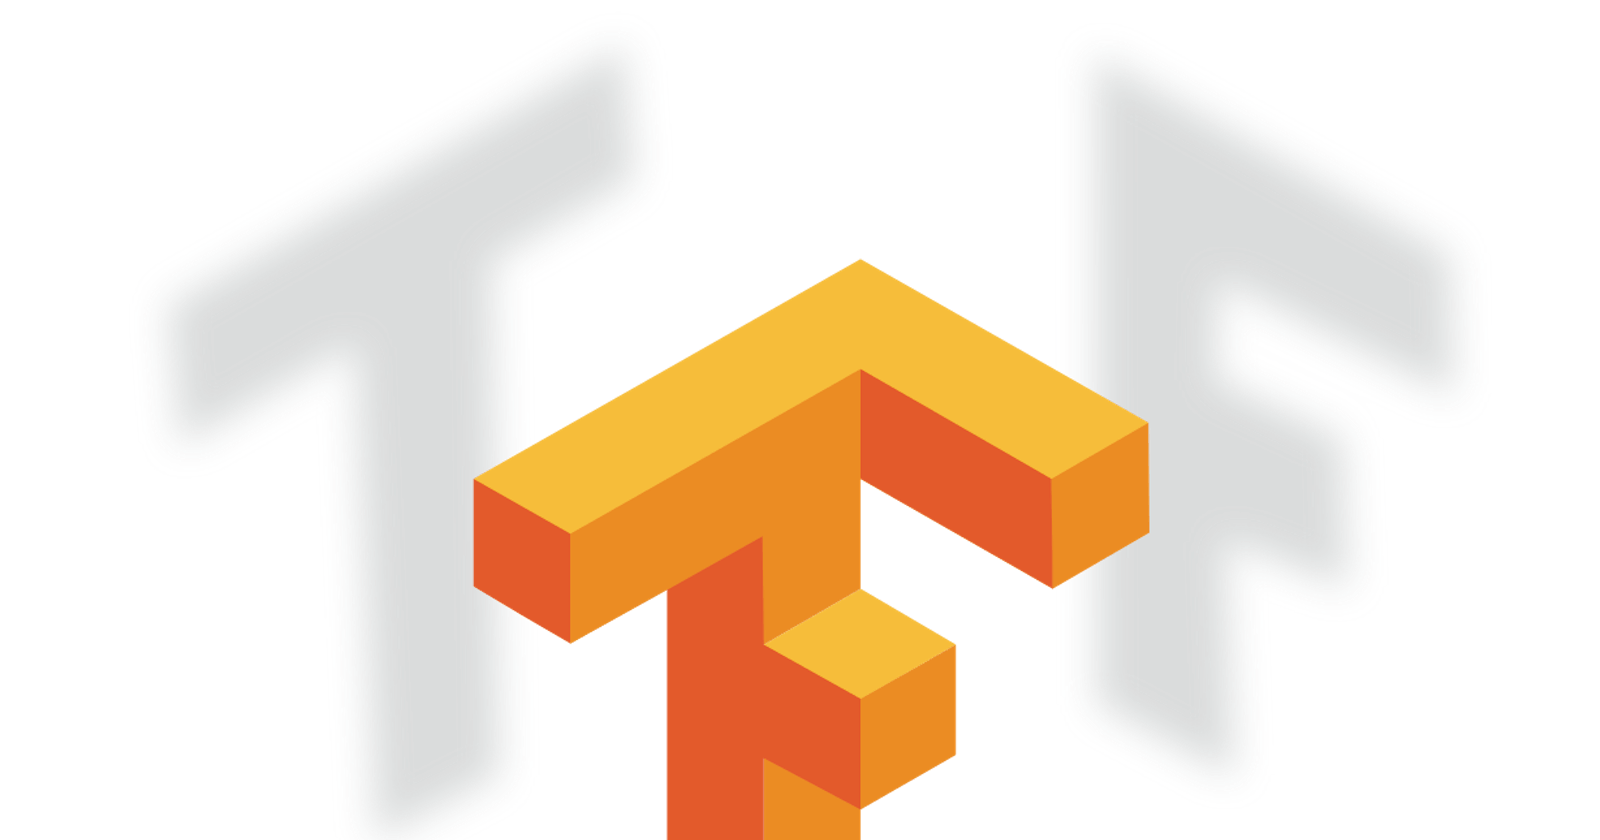 How to perform text classification using TensorFlow in python